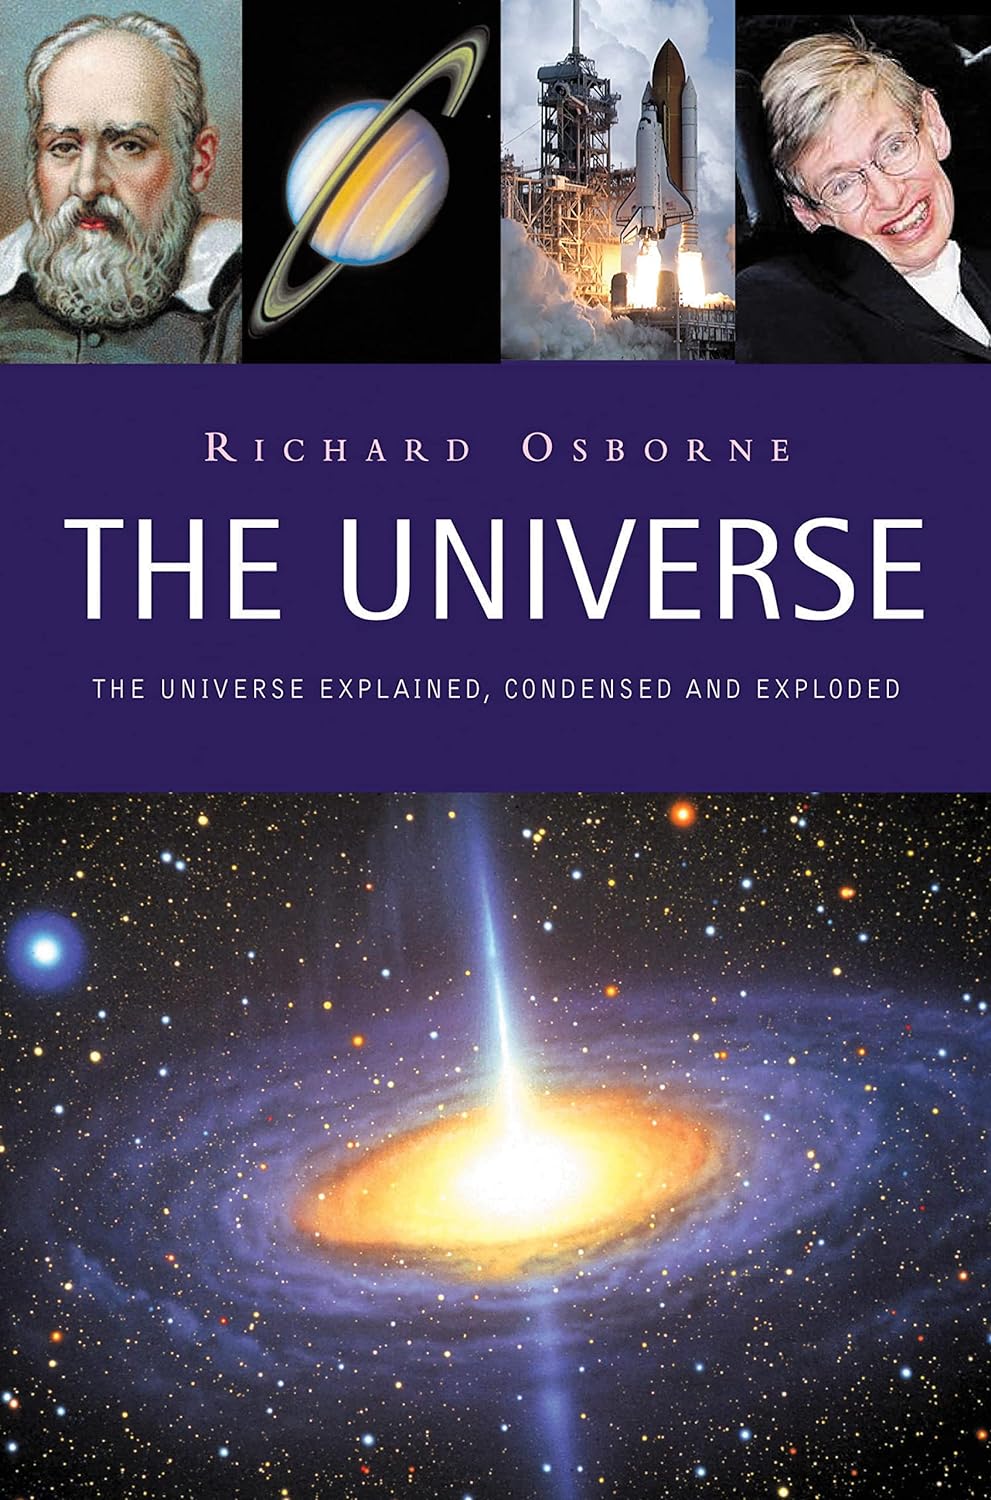 The Universe - Explained, Condensed and Exploded, by Richard Osborne